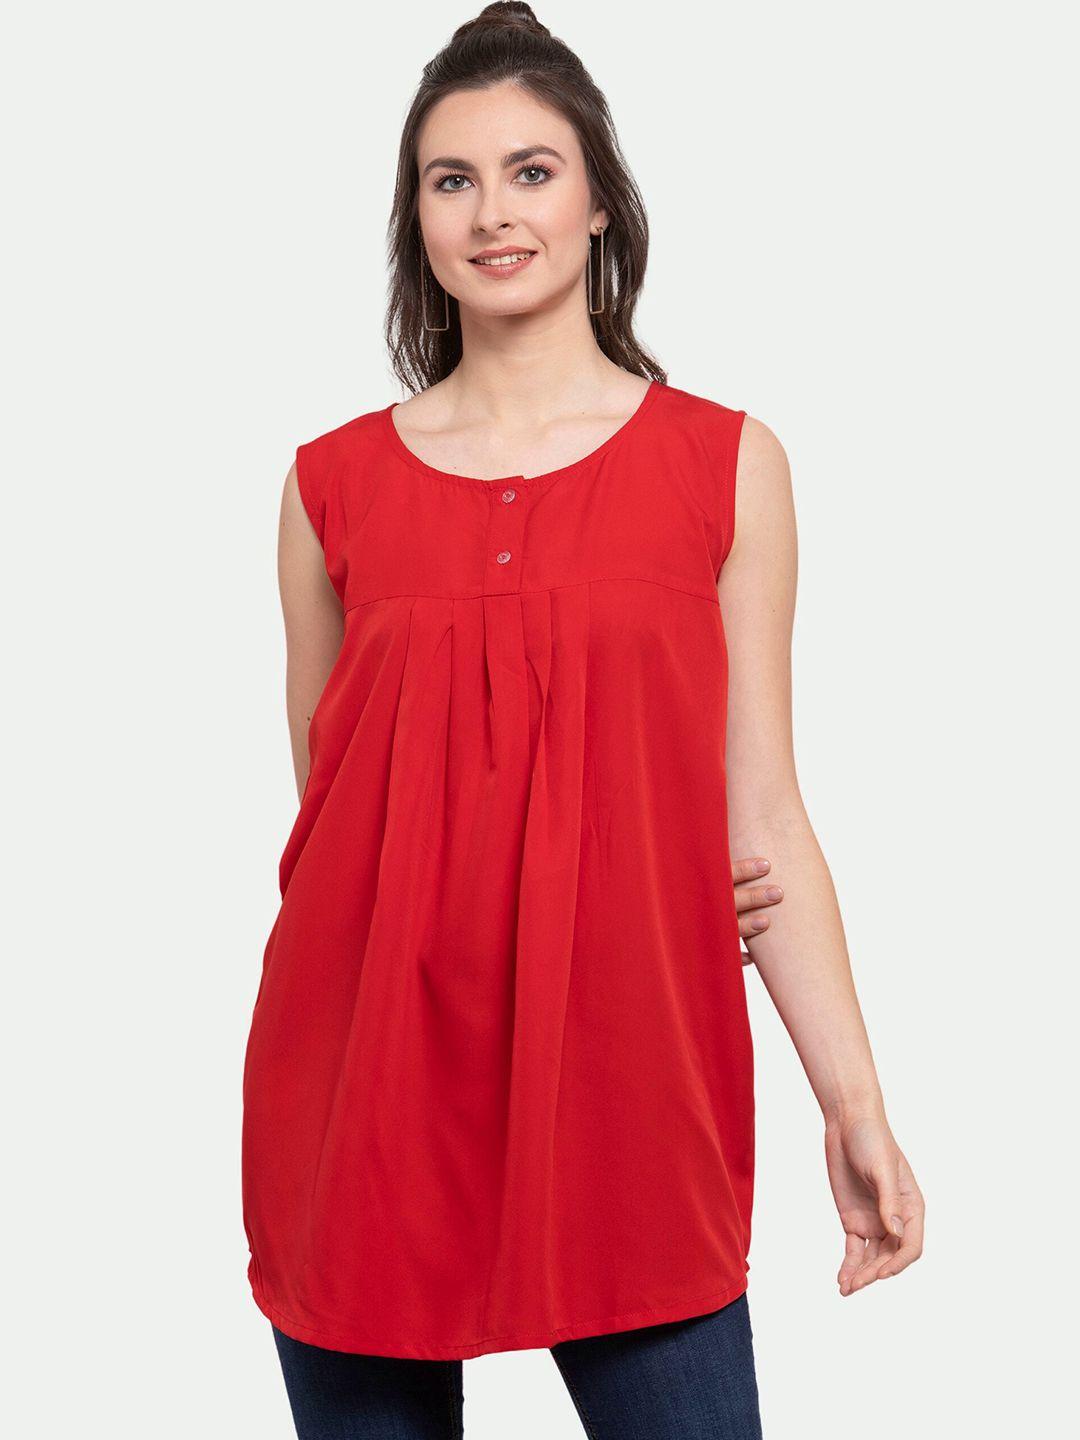 patrorna-women-red-solid-pleated-longline-top